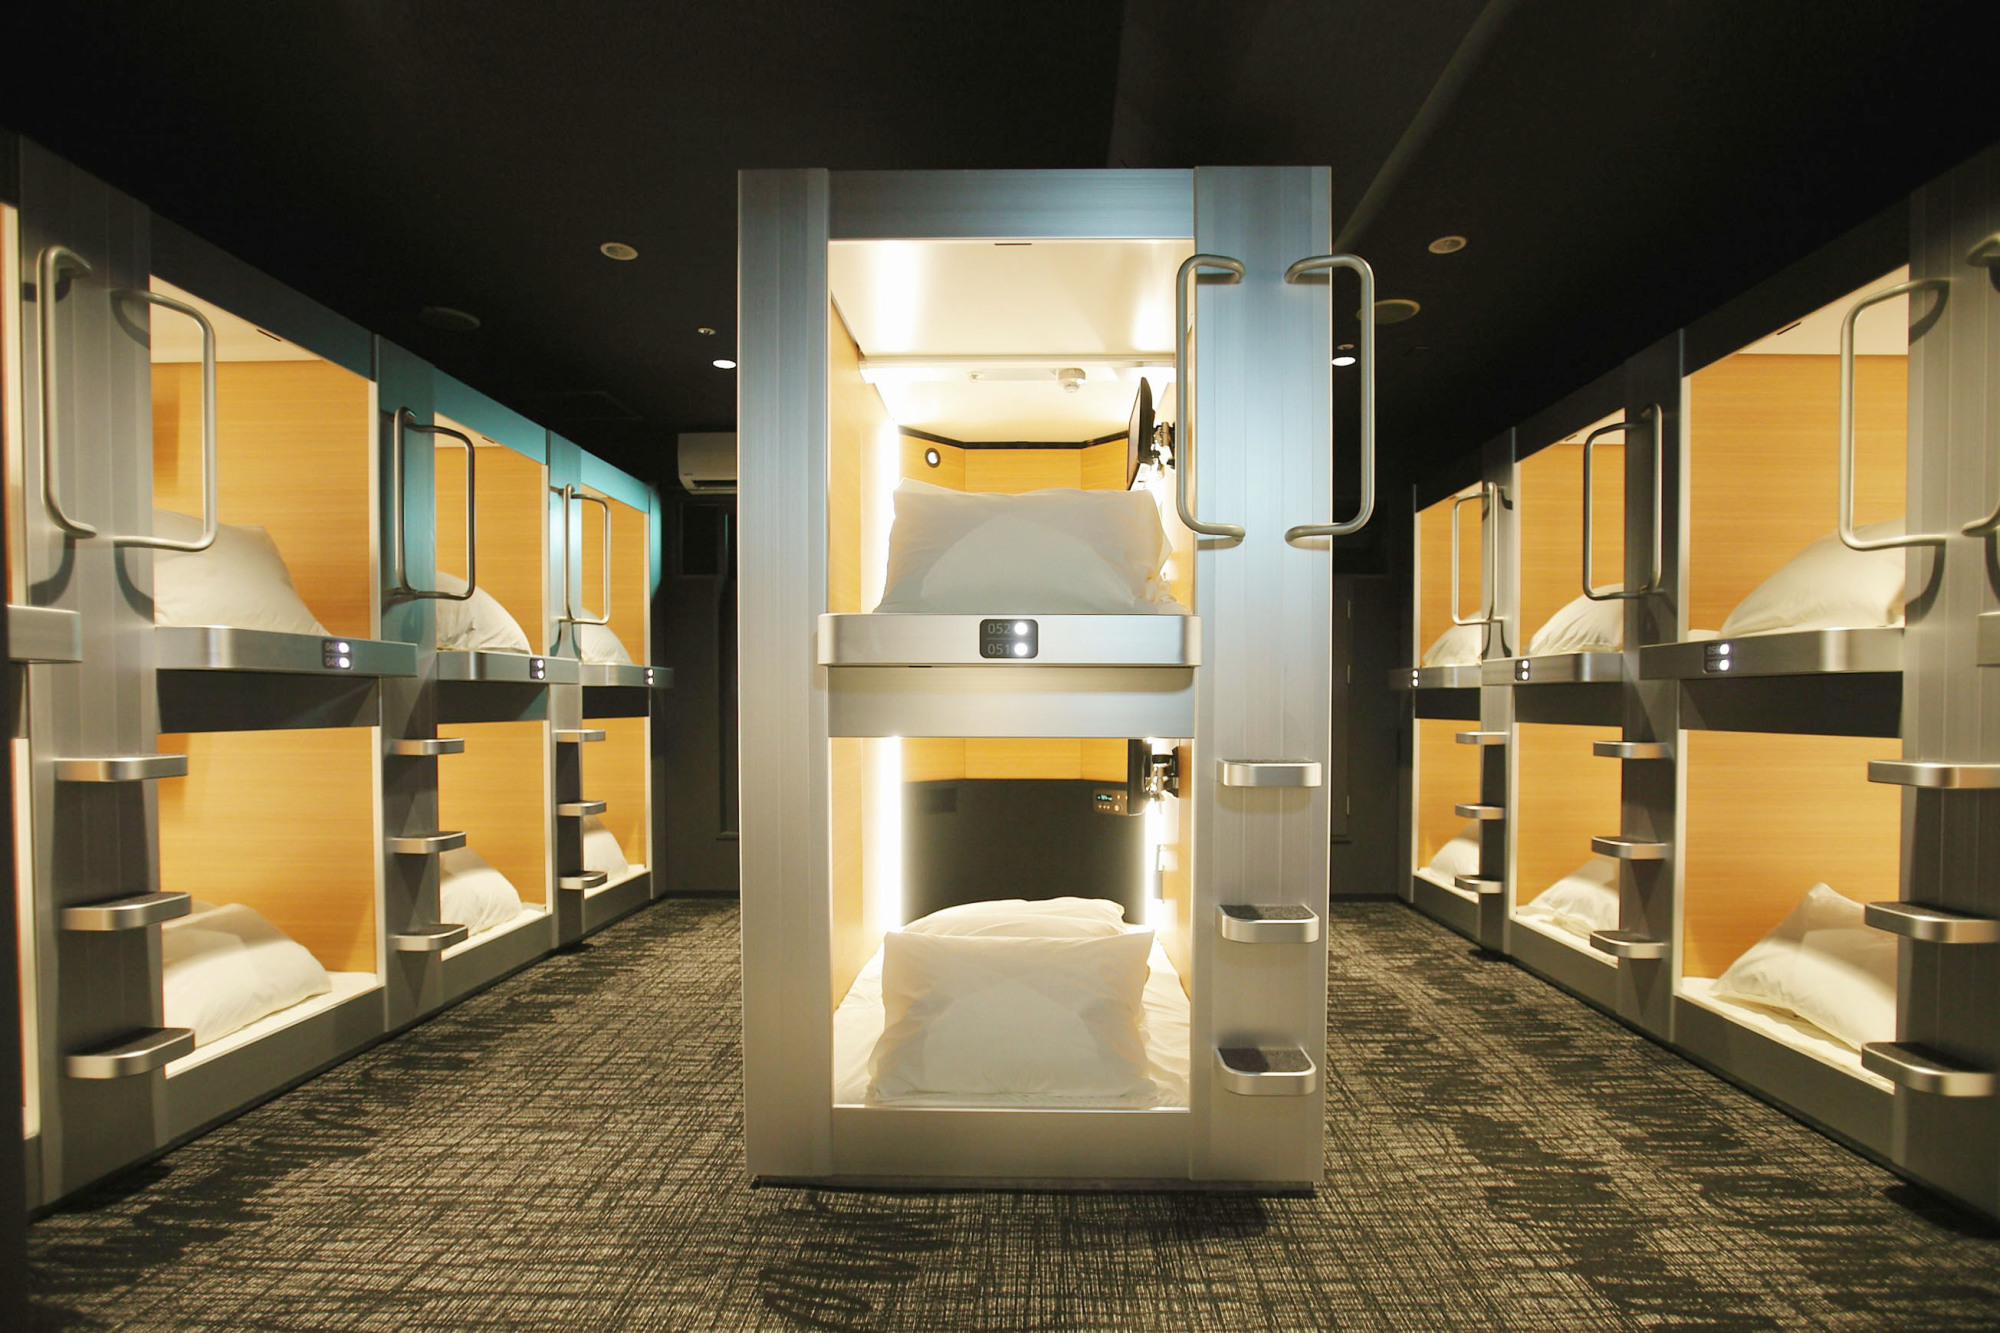 Once aimed at salarymen, Japan's new capsule hotels reach out to